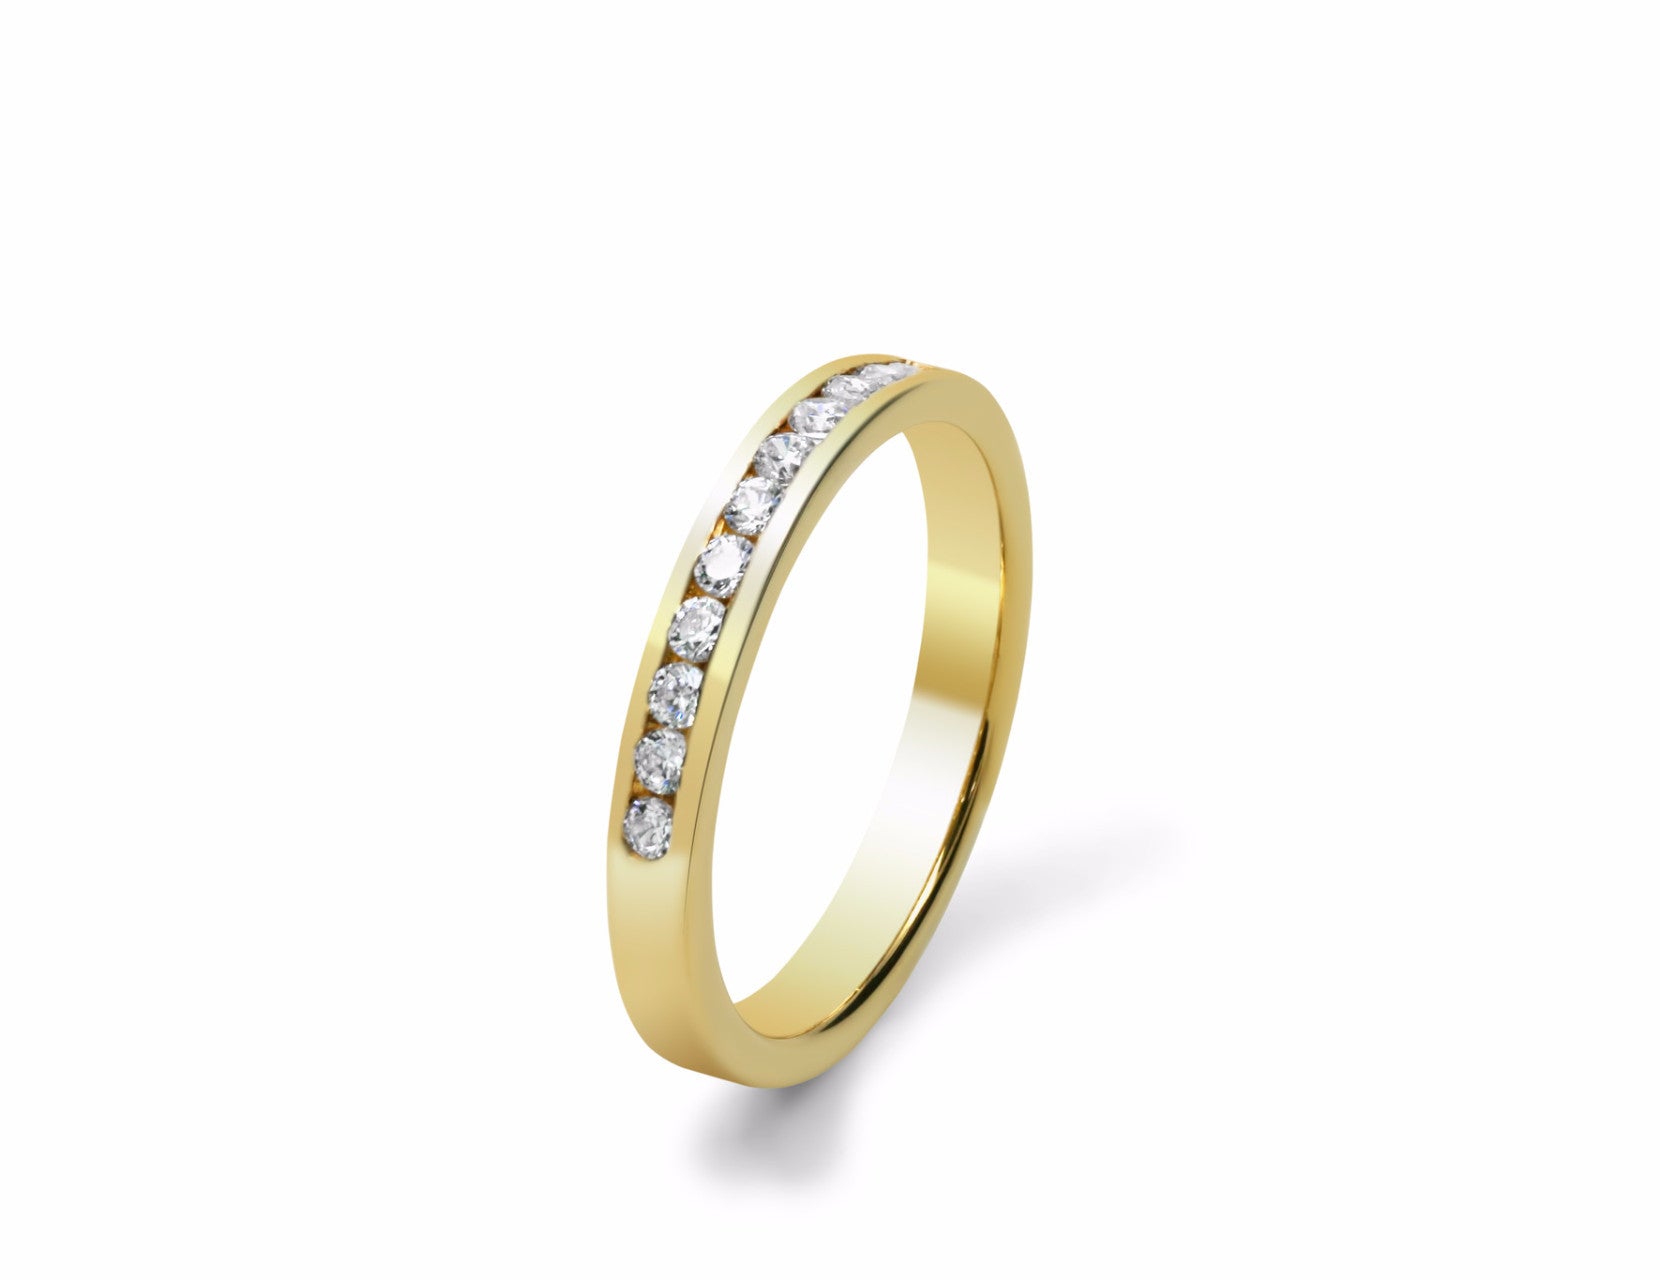 Channel Set Diamond Wedding Ring in yellow gold